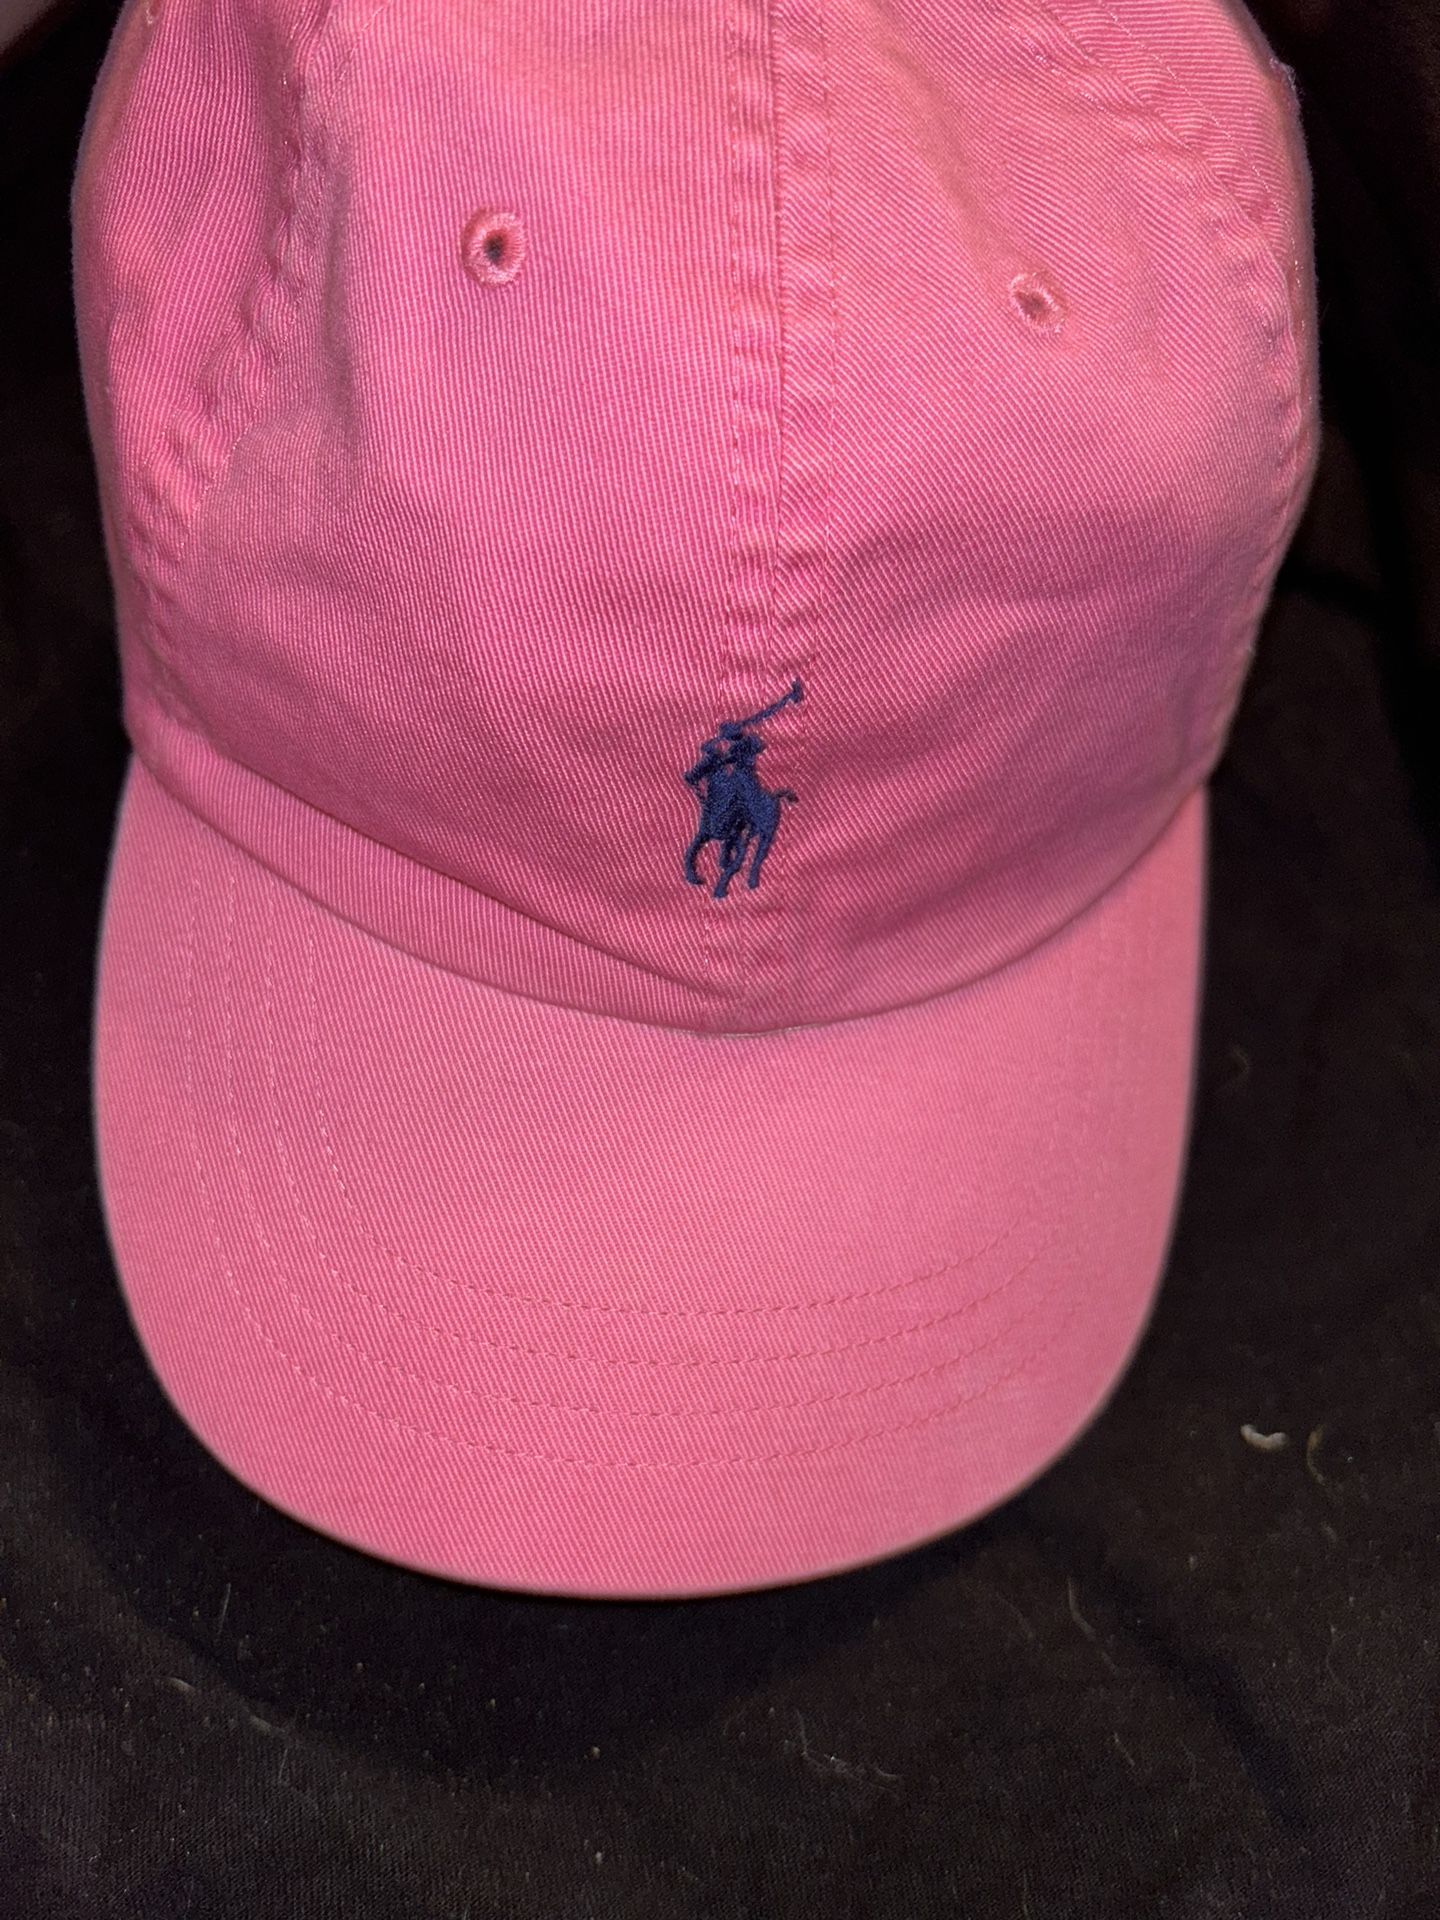 New 1980s Vintage Polo Ralph Lauren Leather Strap Back Cap Pink